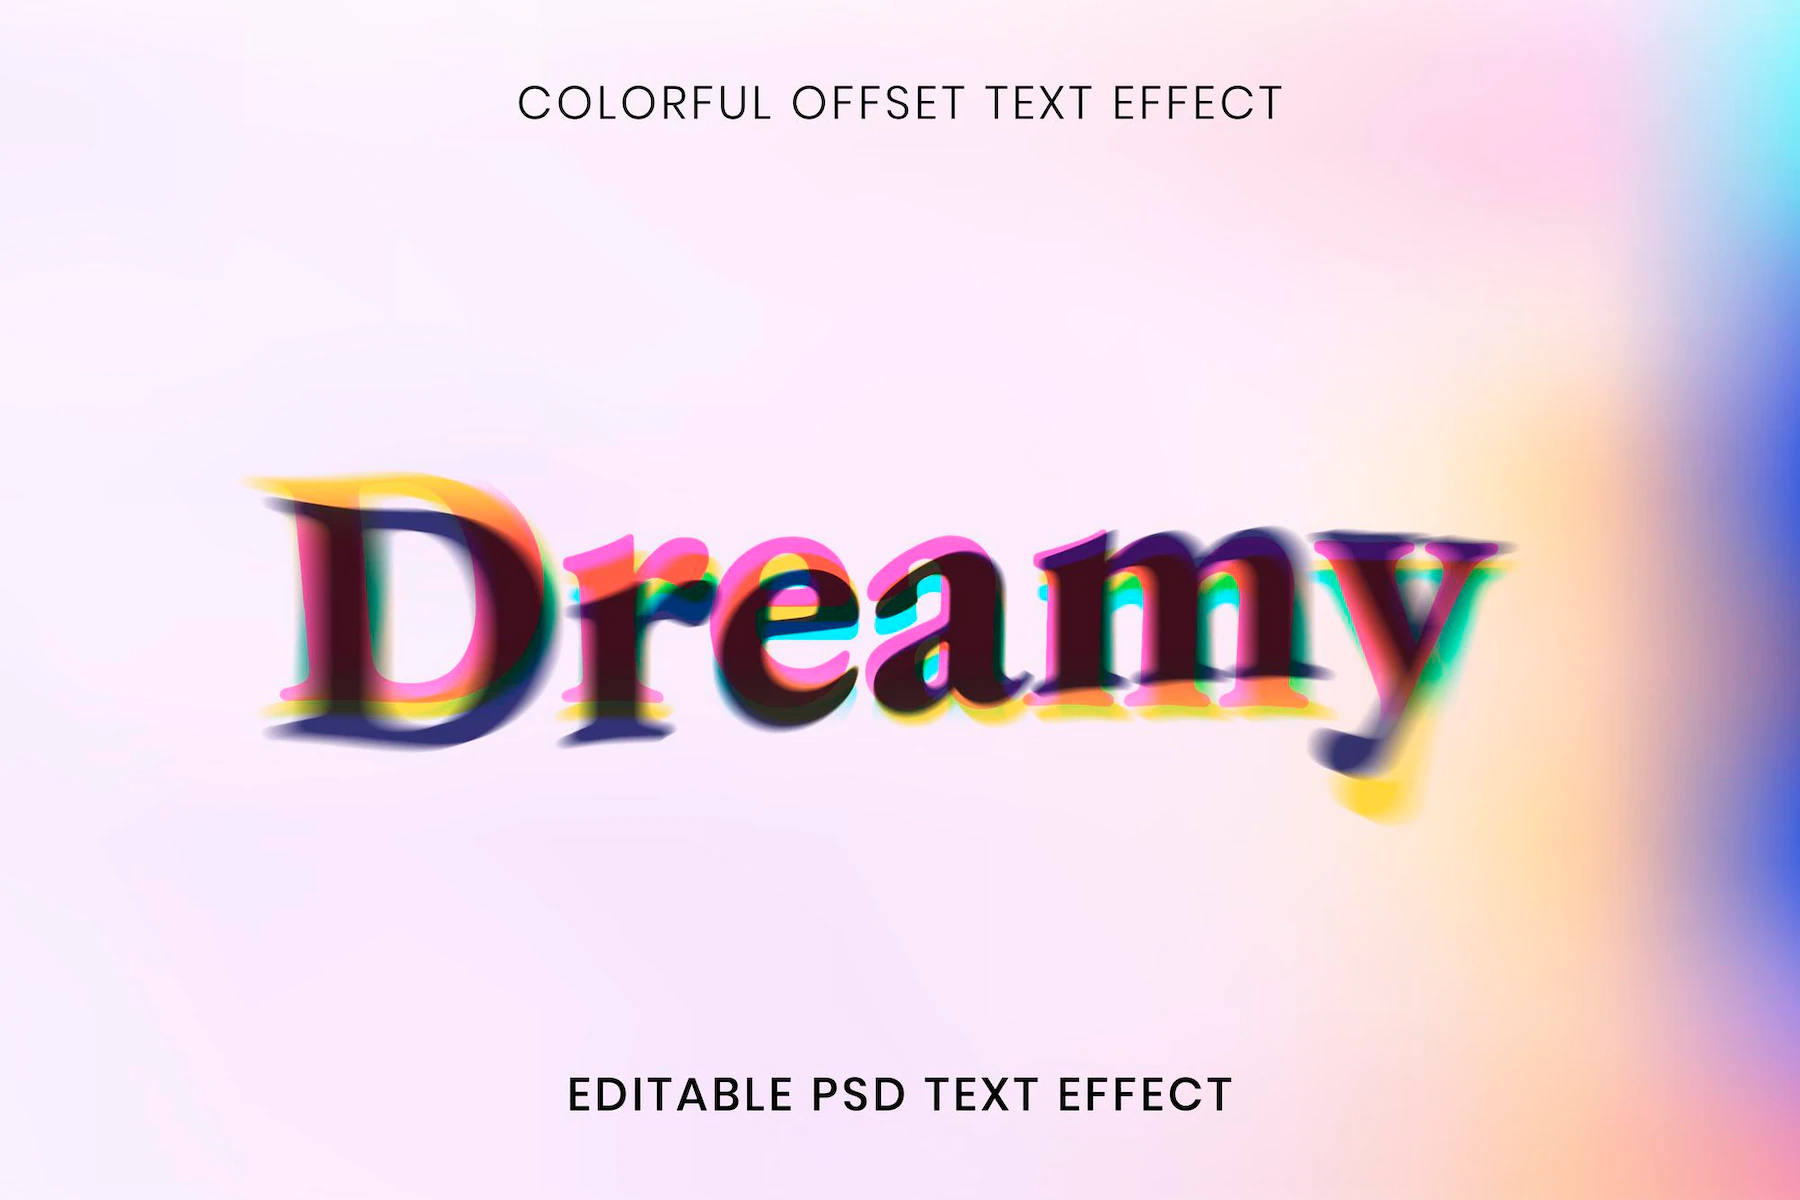 editable text effect psd template colorful offset font typography 53876 145069